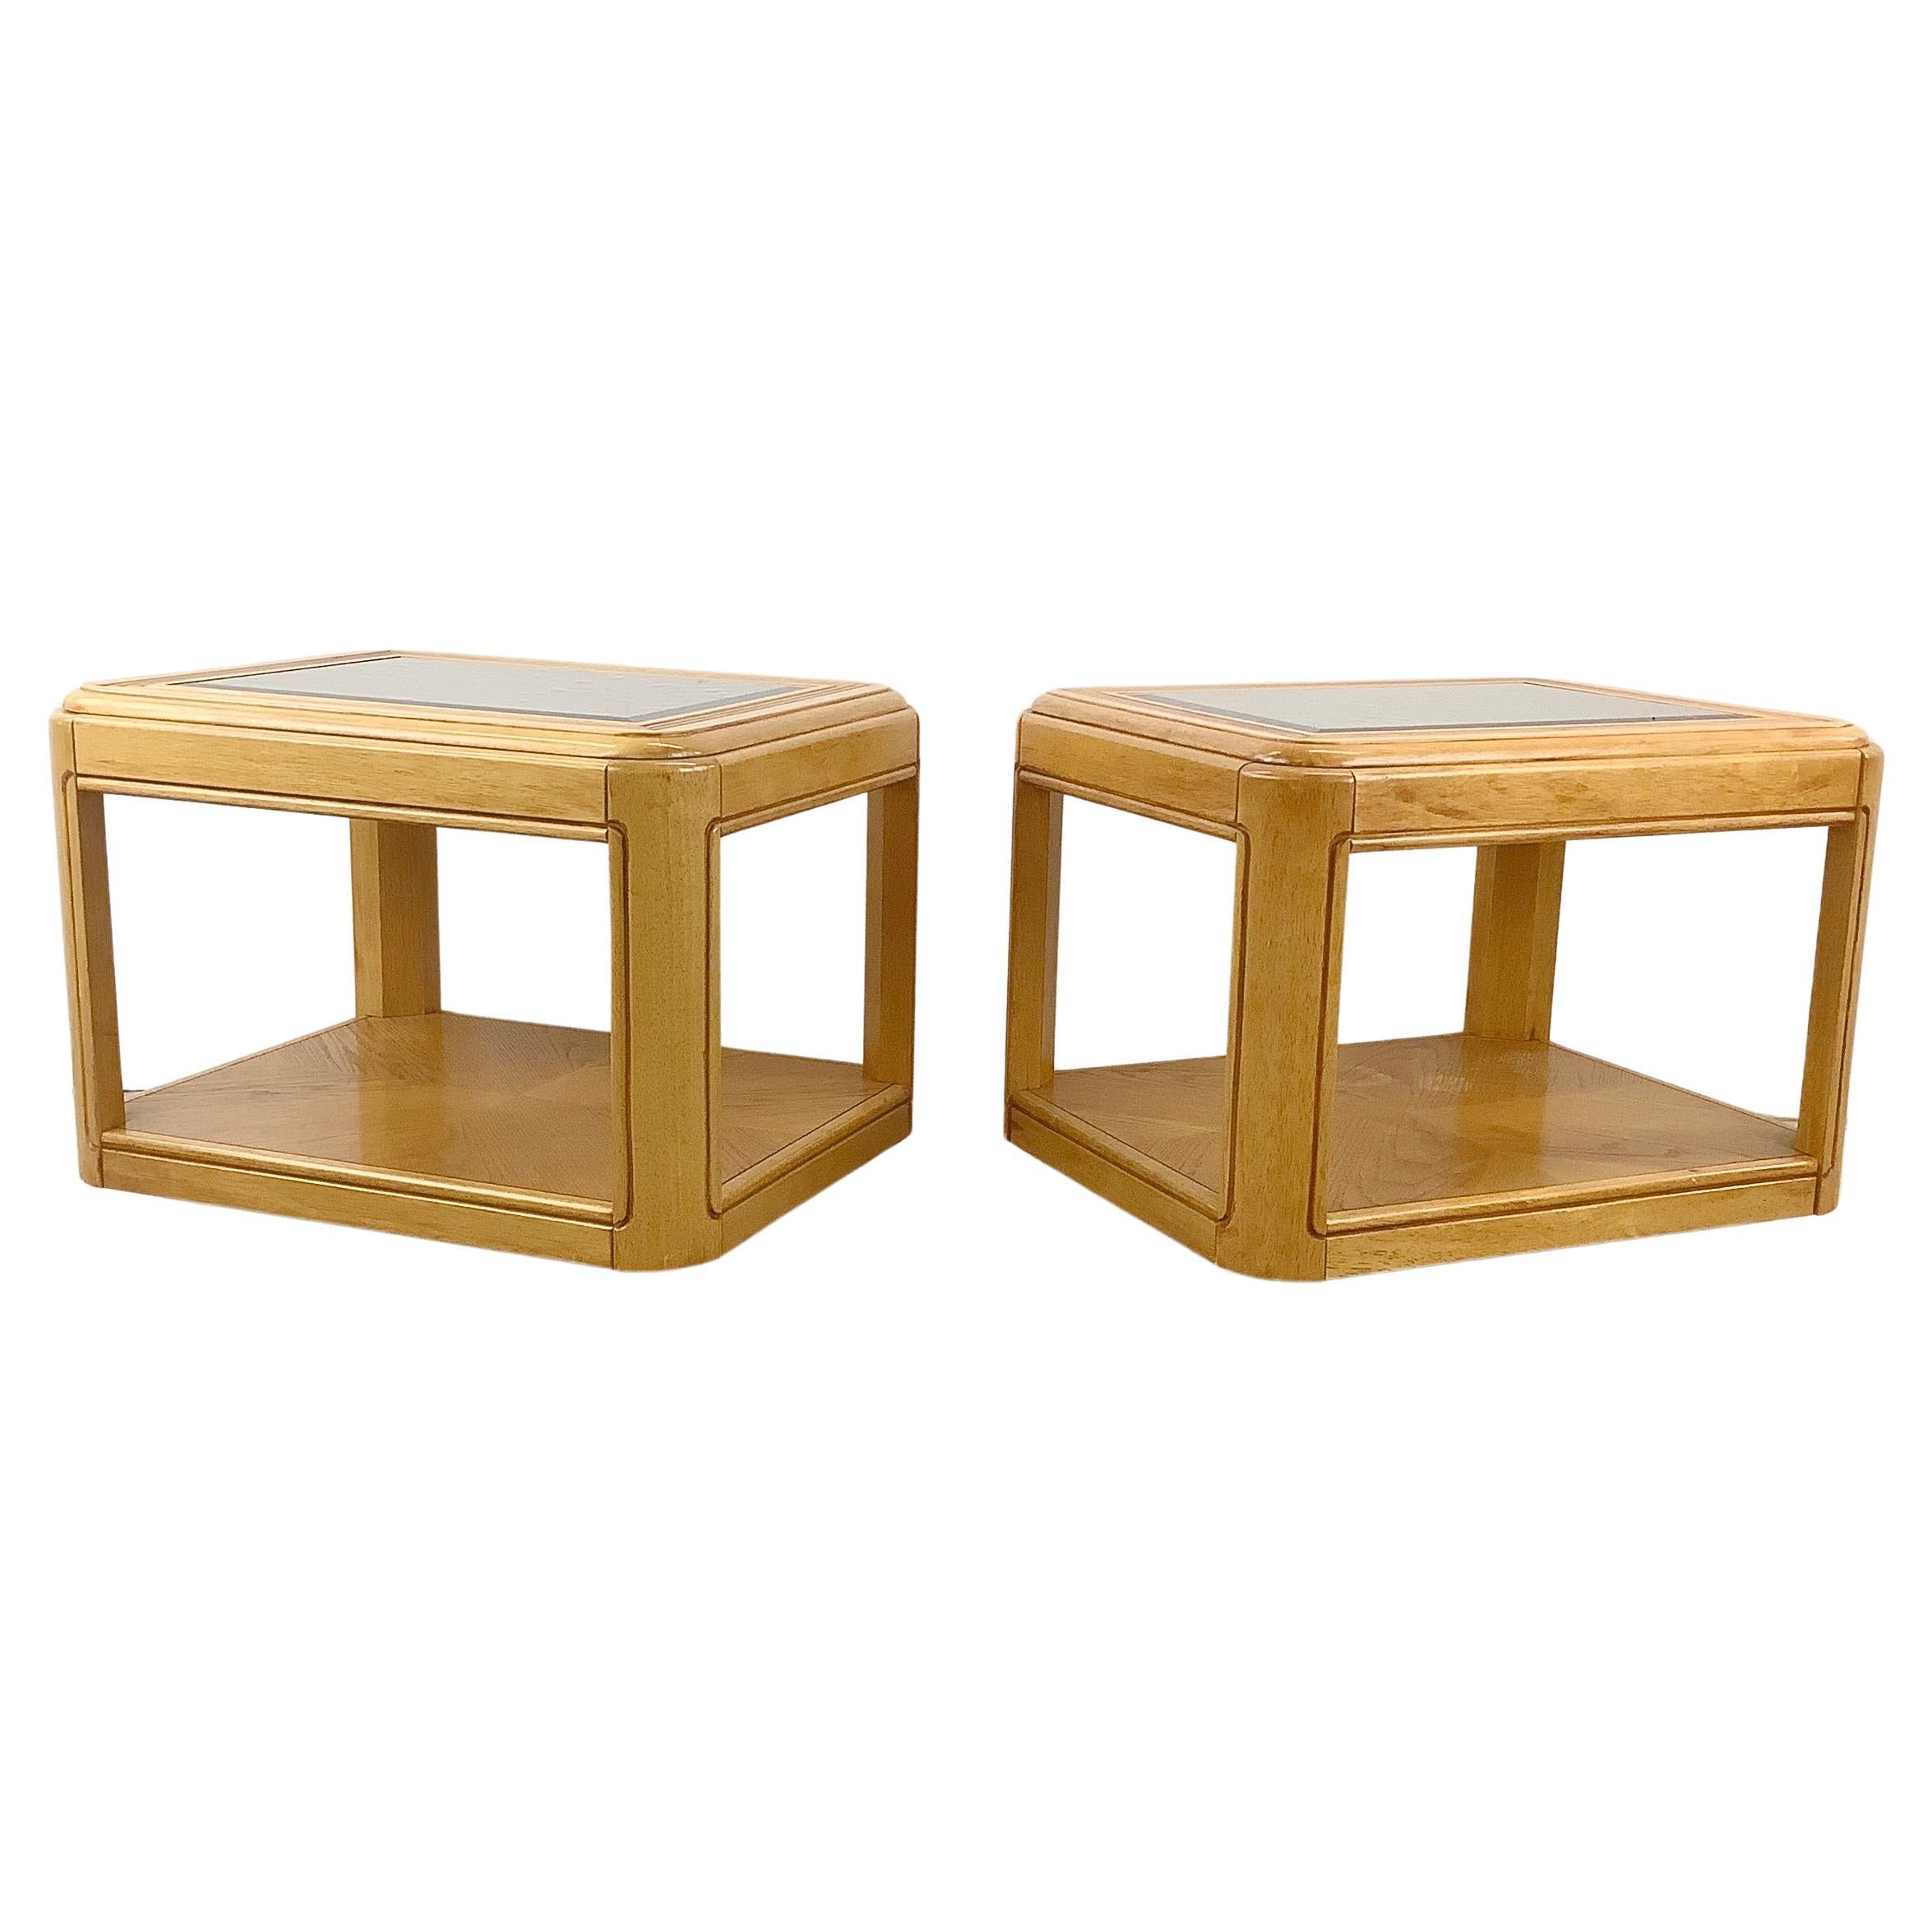 This pair of 1980s Two Tier Oak End Tables feature a harmonious blend of classic design and modern functionality. These tables are a must-have for anyone with a penchant for vintage chic and sustainable living.

Crafted in the 1980s these tables